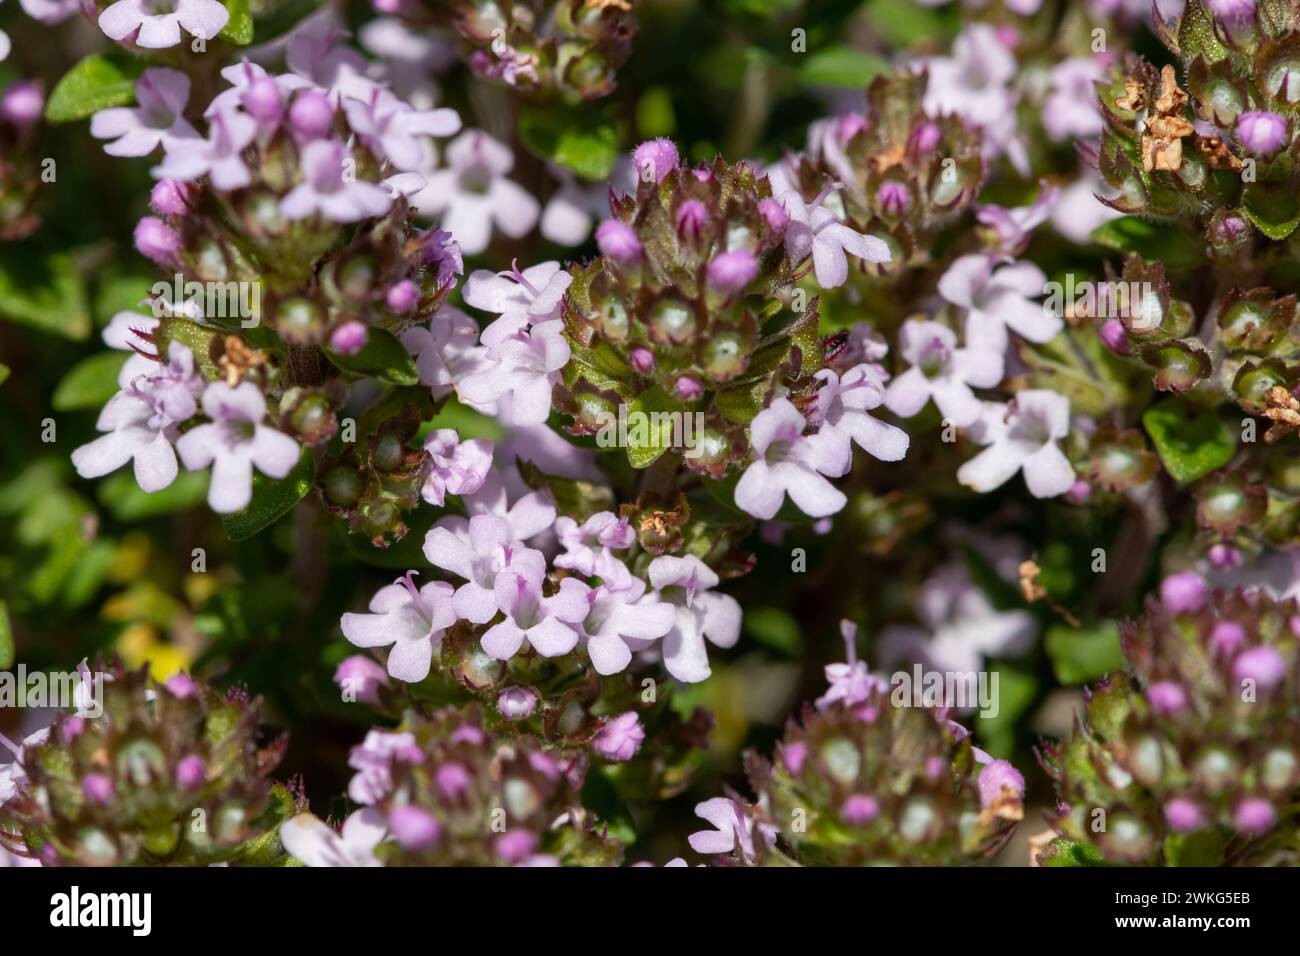 Close up of valerian (valeriana officinalis) flowers in bloom Stock Photo